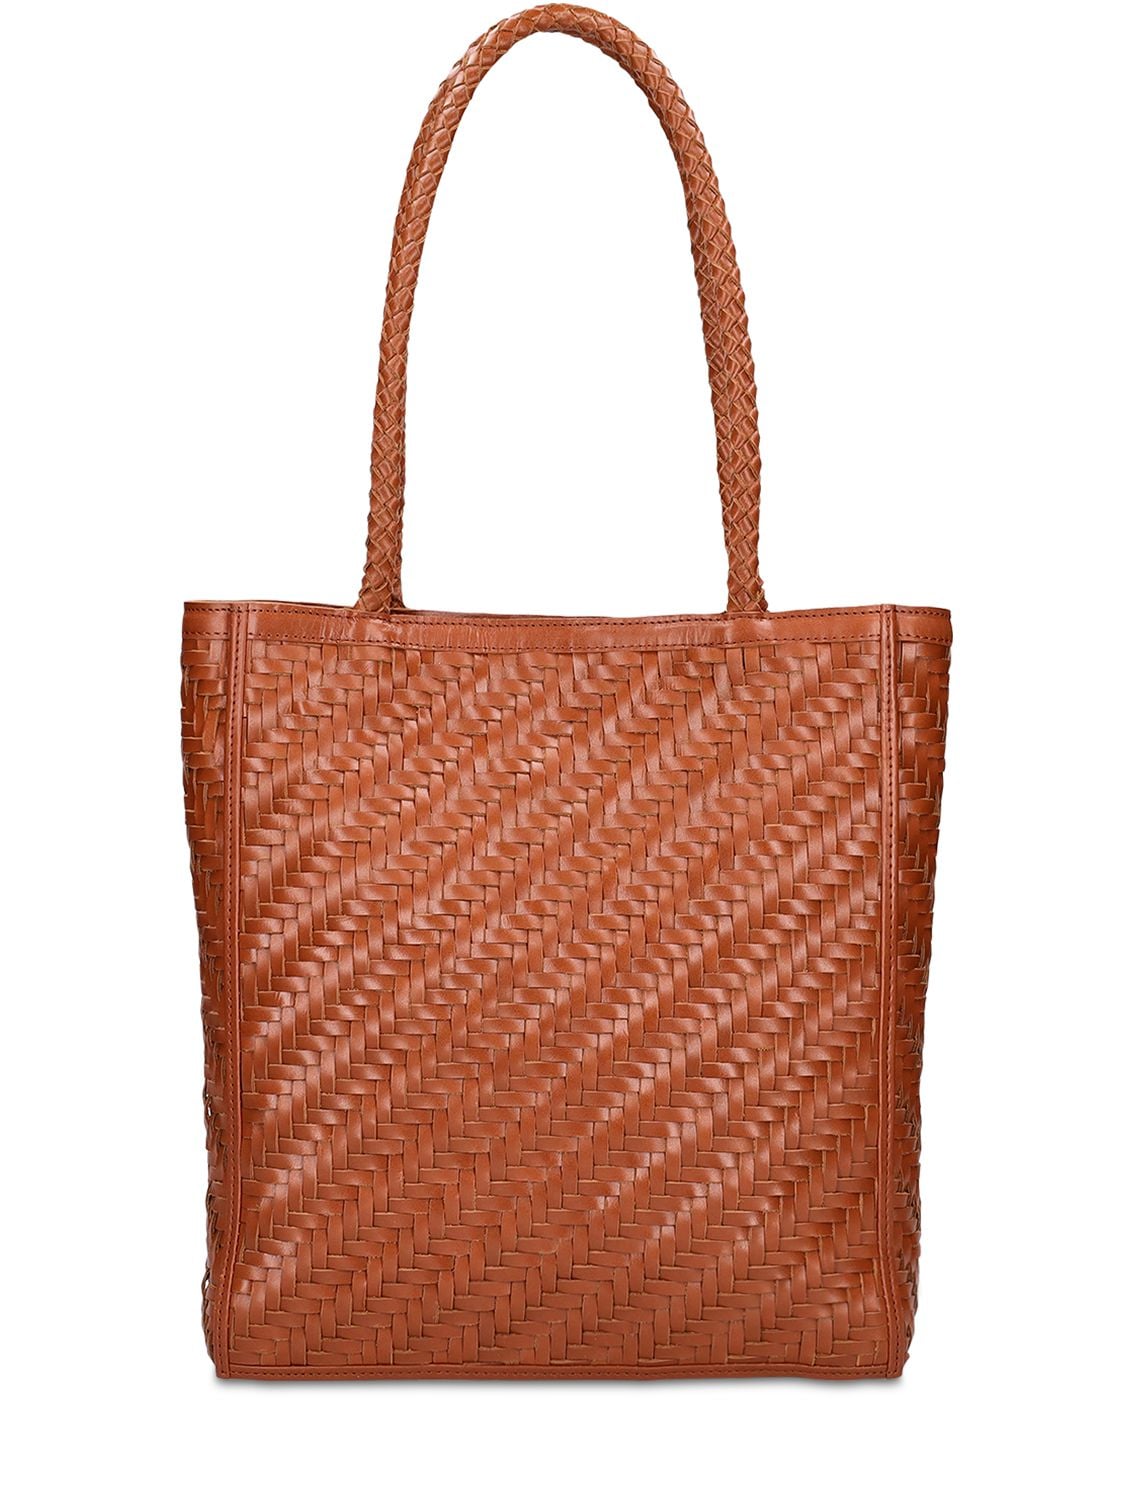 BEMBIEN Le Tote Leather Bag